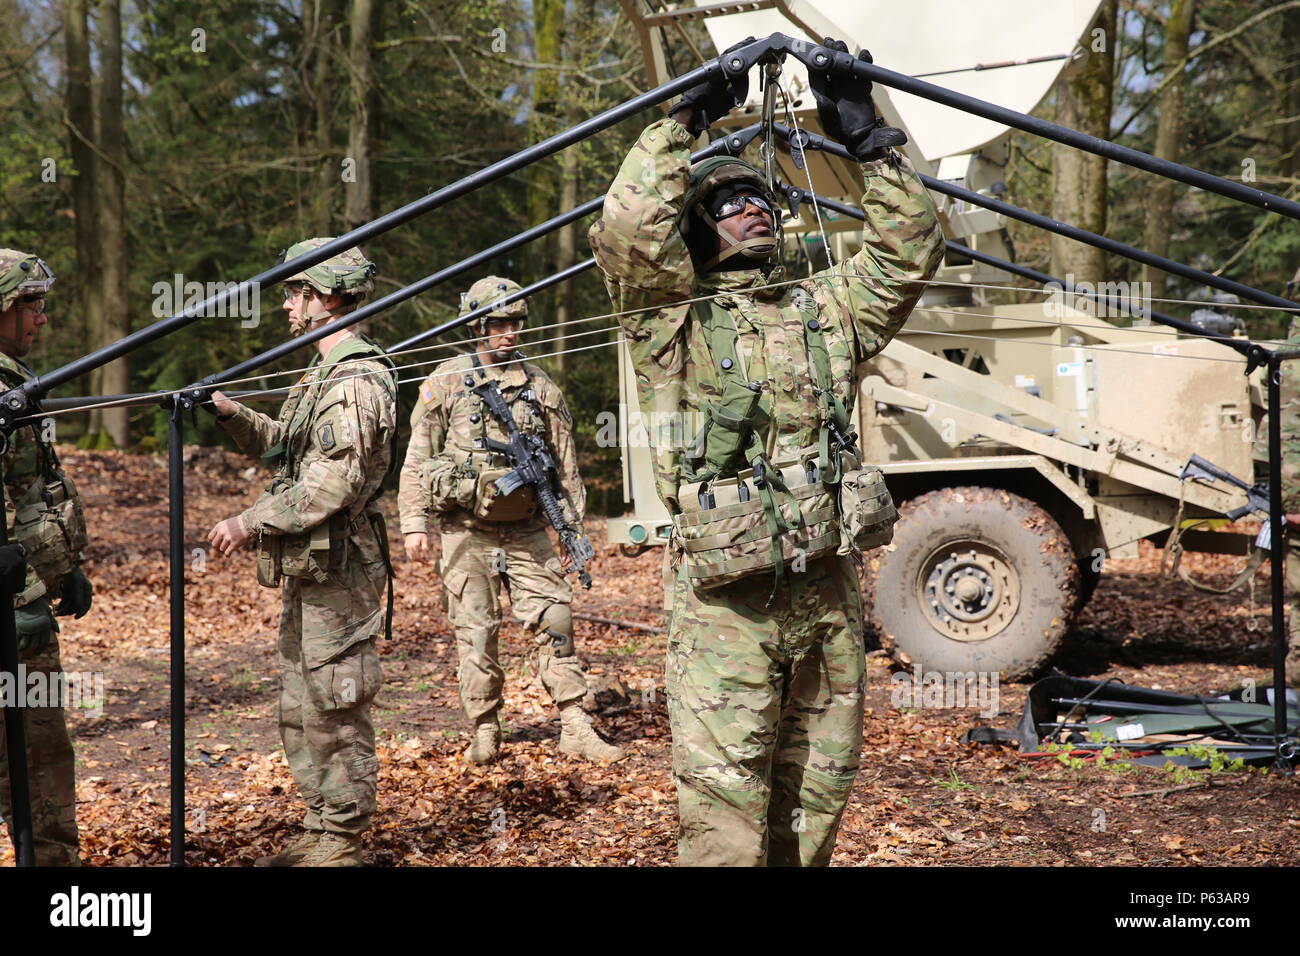 U.S. Soldiers of 1st Squadron, 91st Cavalry Regiment, 173rd Airborne Brigade construct a tent while conducting tactical operations during exercise Saber Junction 16 at the U.S. Army’s Joint Multinational Readiness Center (JMRC) in Hohenfels, Germany, April 16, 2016. Saber Junction 16 is the U.S. Army Europe’s 173rd Airborne Brigade’s combat training center certification exercise, taking place at the JMRC in Hohenfels, Germany, Mar. 31-Apr. 24, 2016.  The exercise is designed to evaluate the readiness of the Army’s Europe-based combat brigades to conduct unified land operations and promote inte Stock Photo